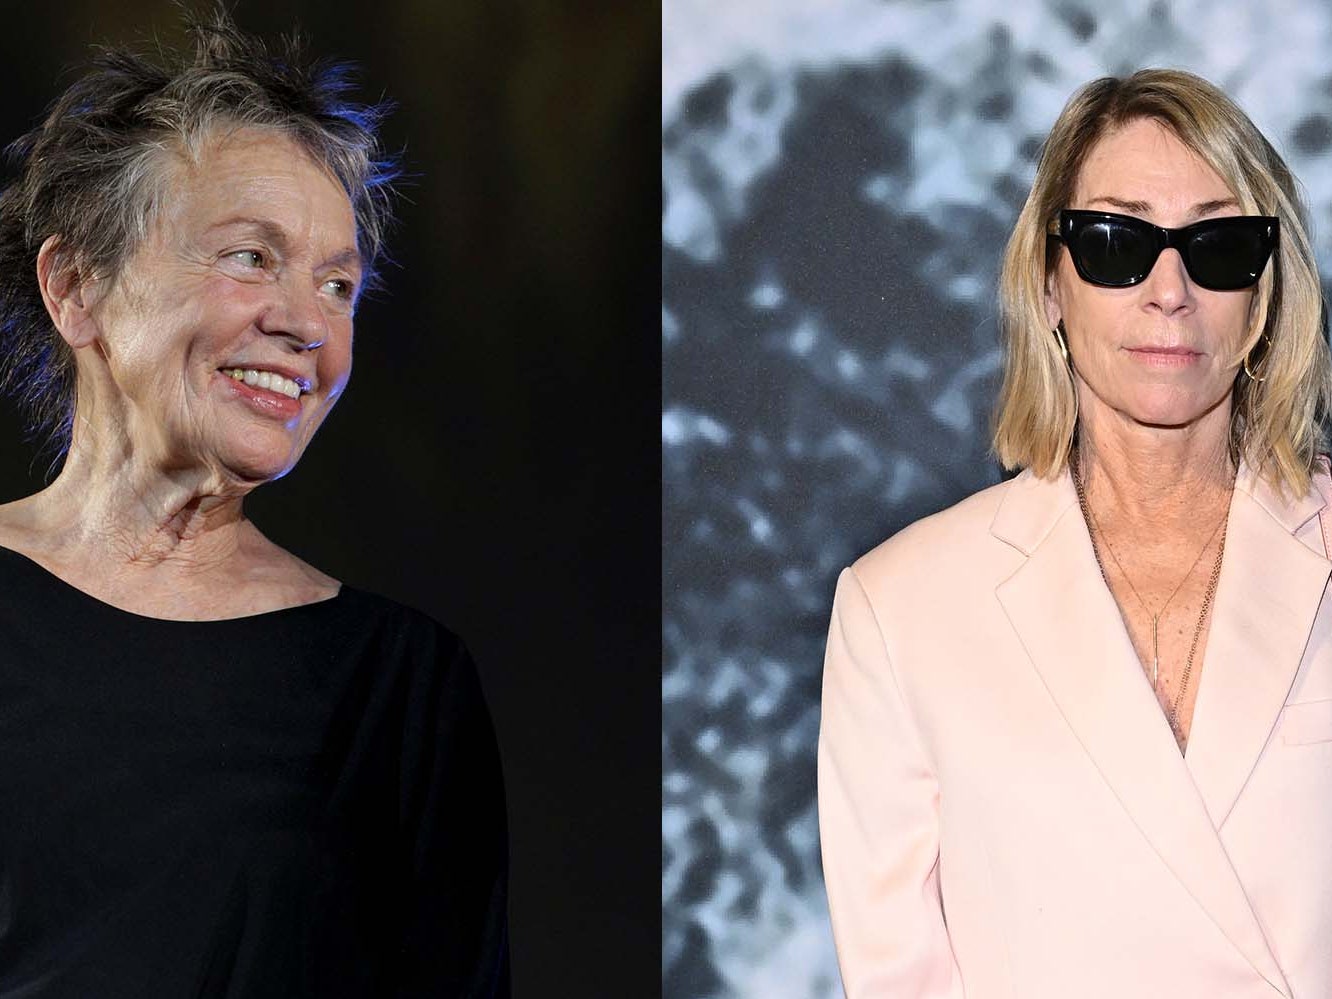 Words of Wisdom From Laurie Anderson and Kim Gordon